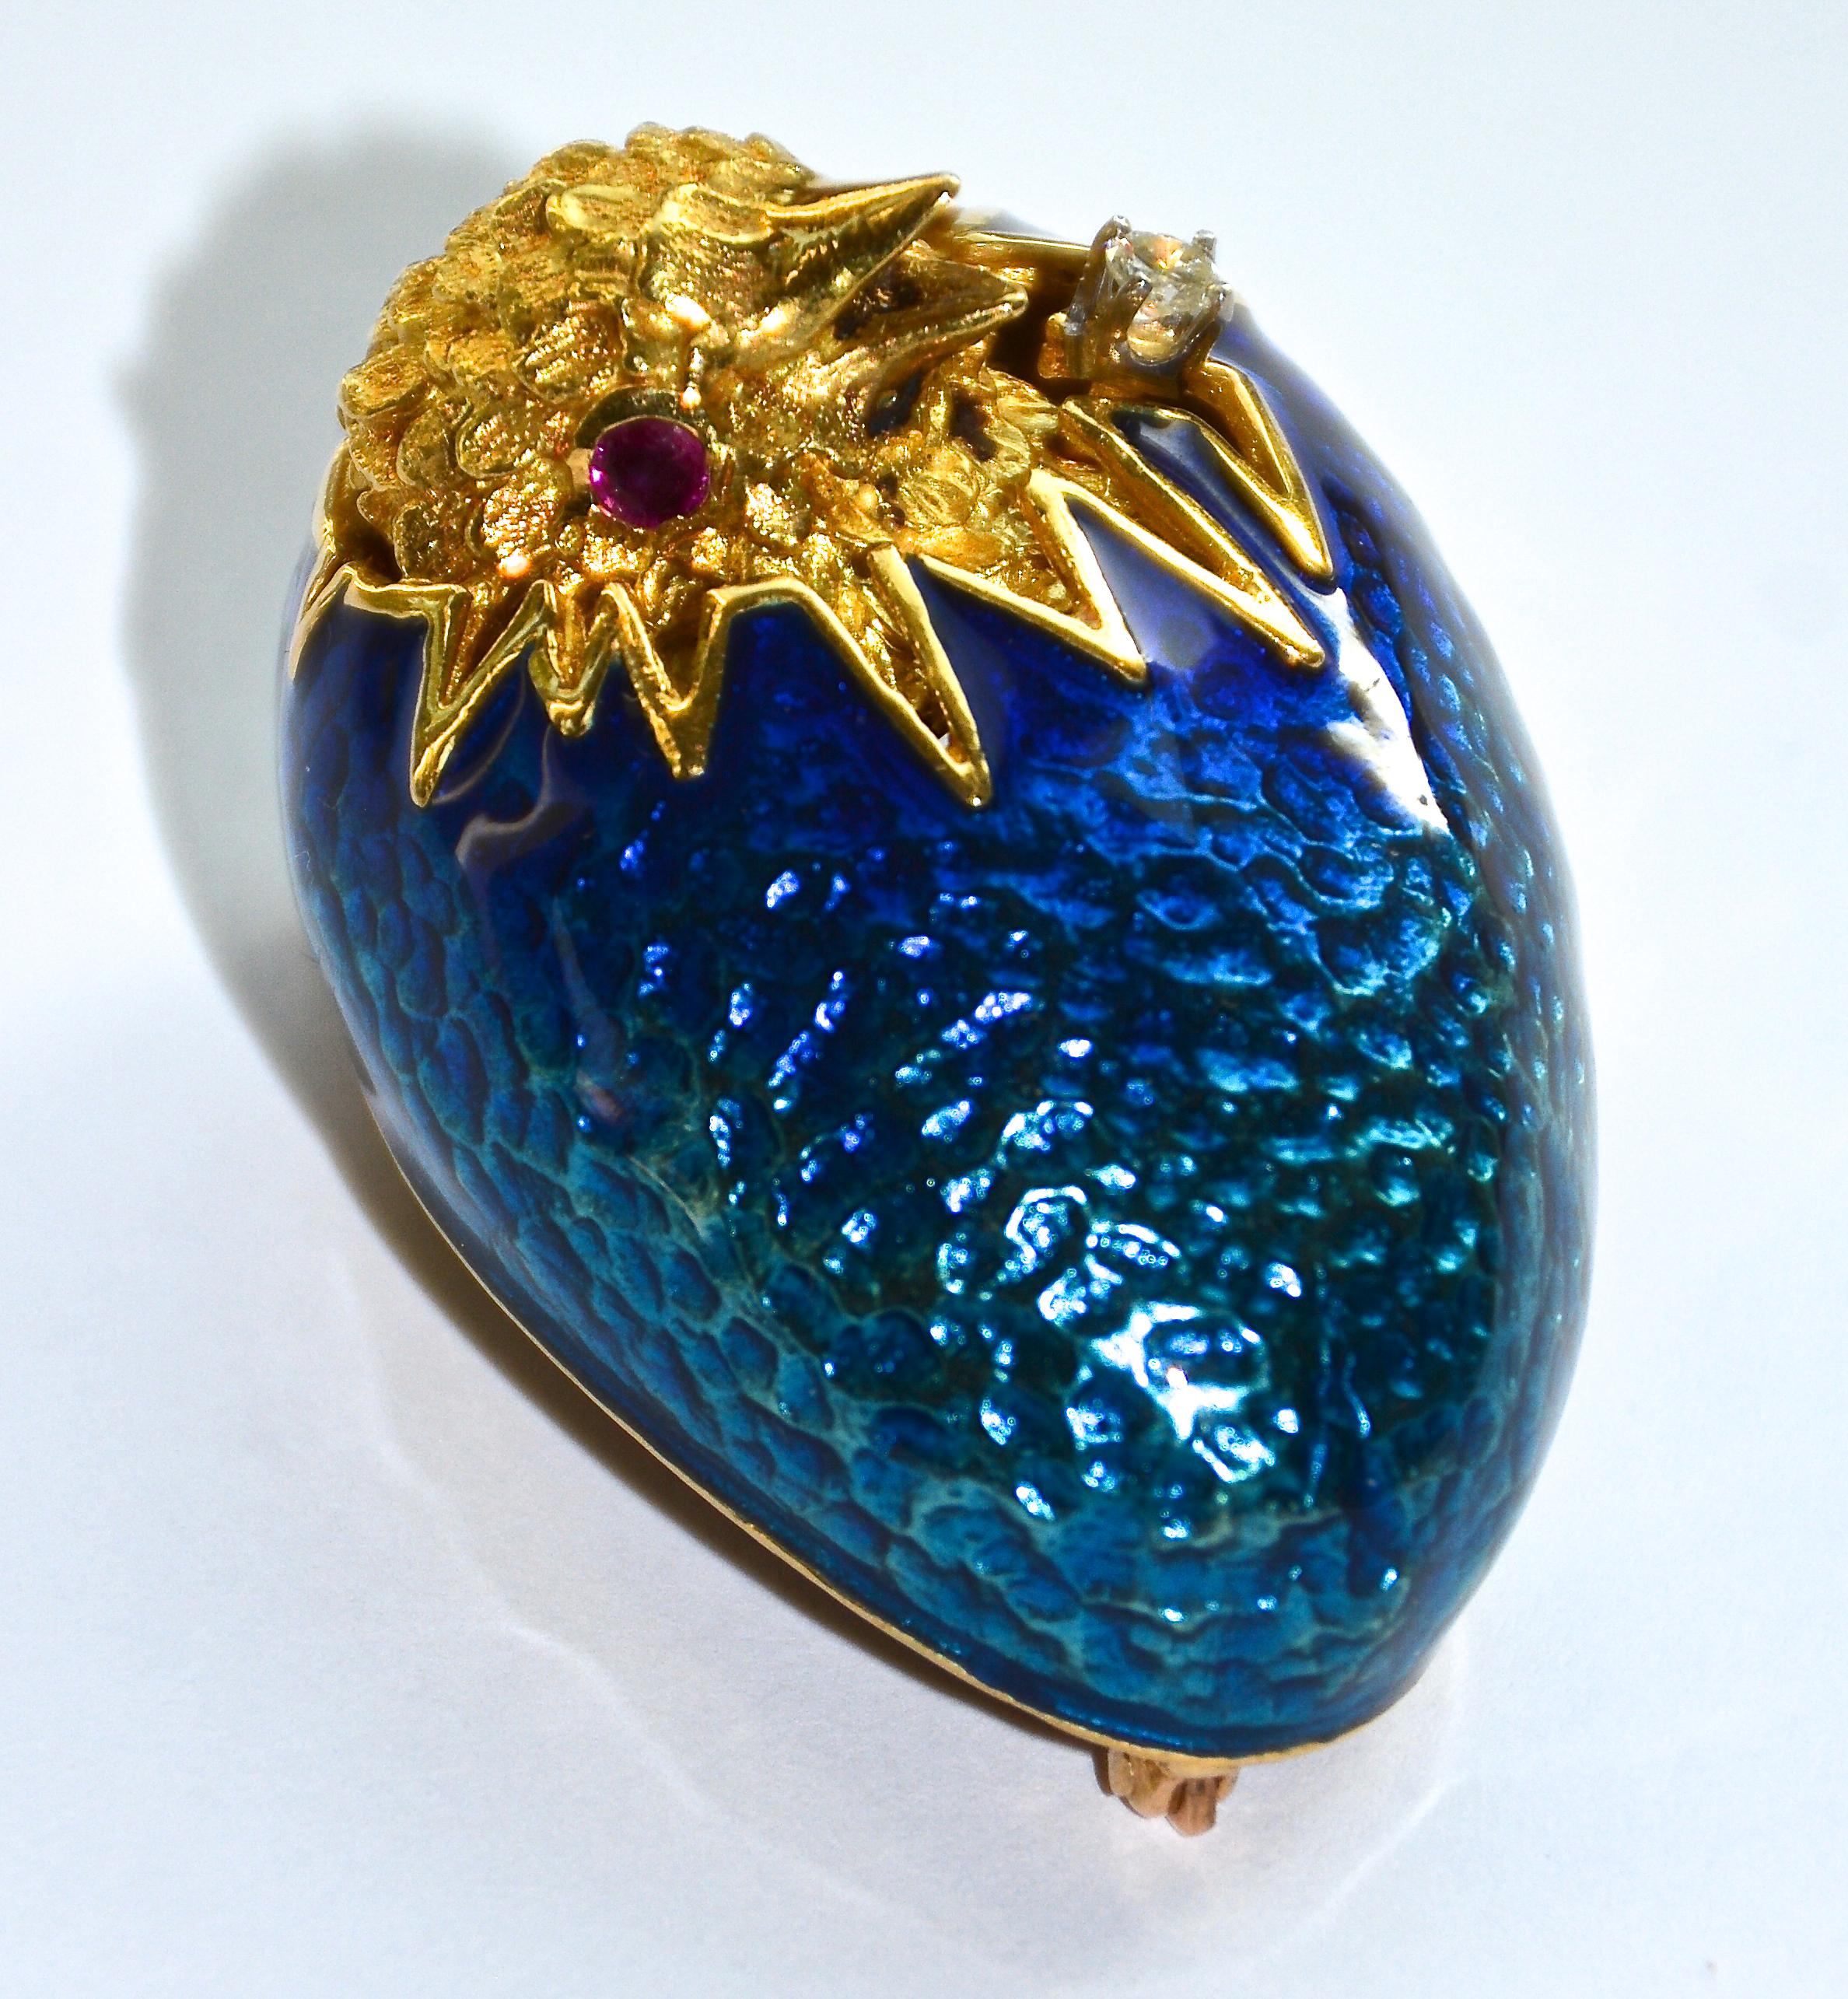 Brilliant Cut Blue Enameled 18k Egg Featuring a Hatching Chick with a Diamond and Ruby Eyes For Sale